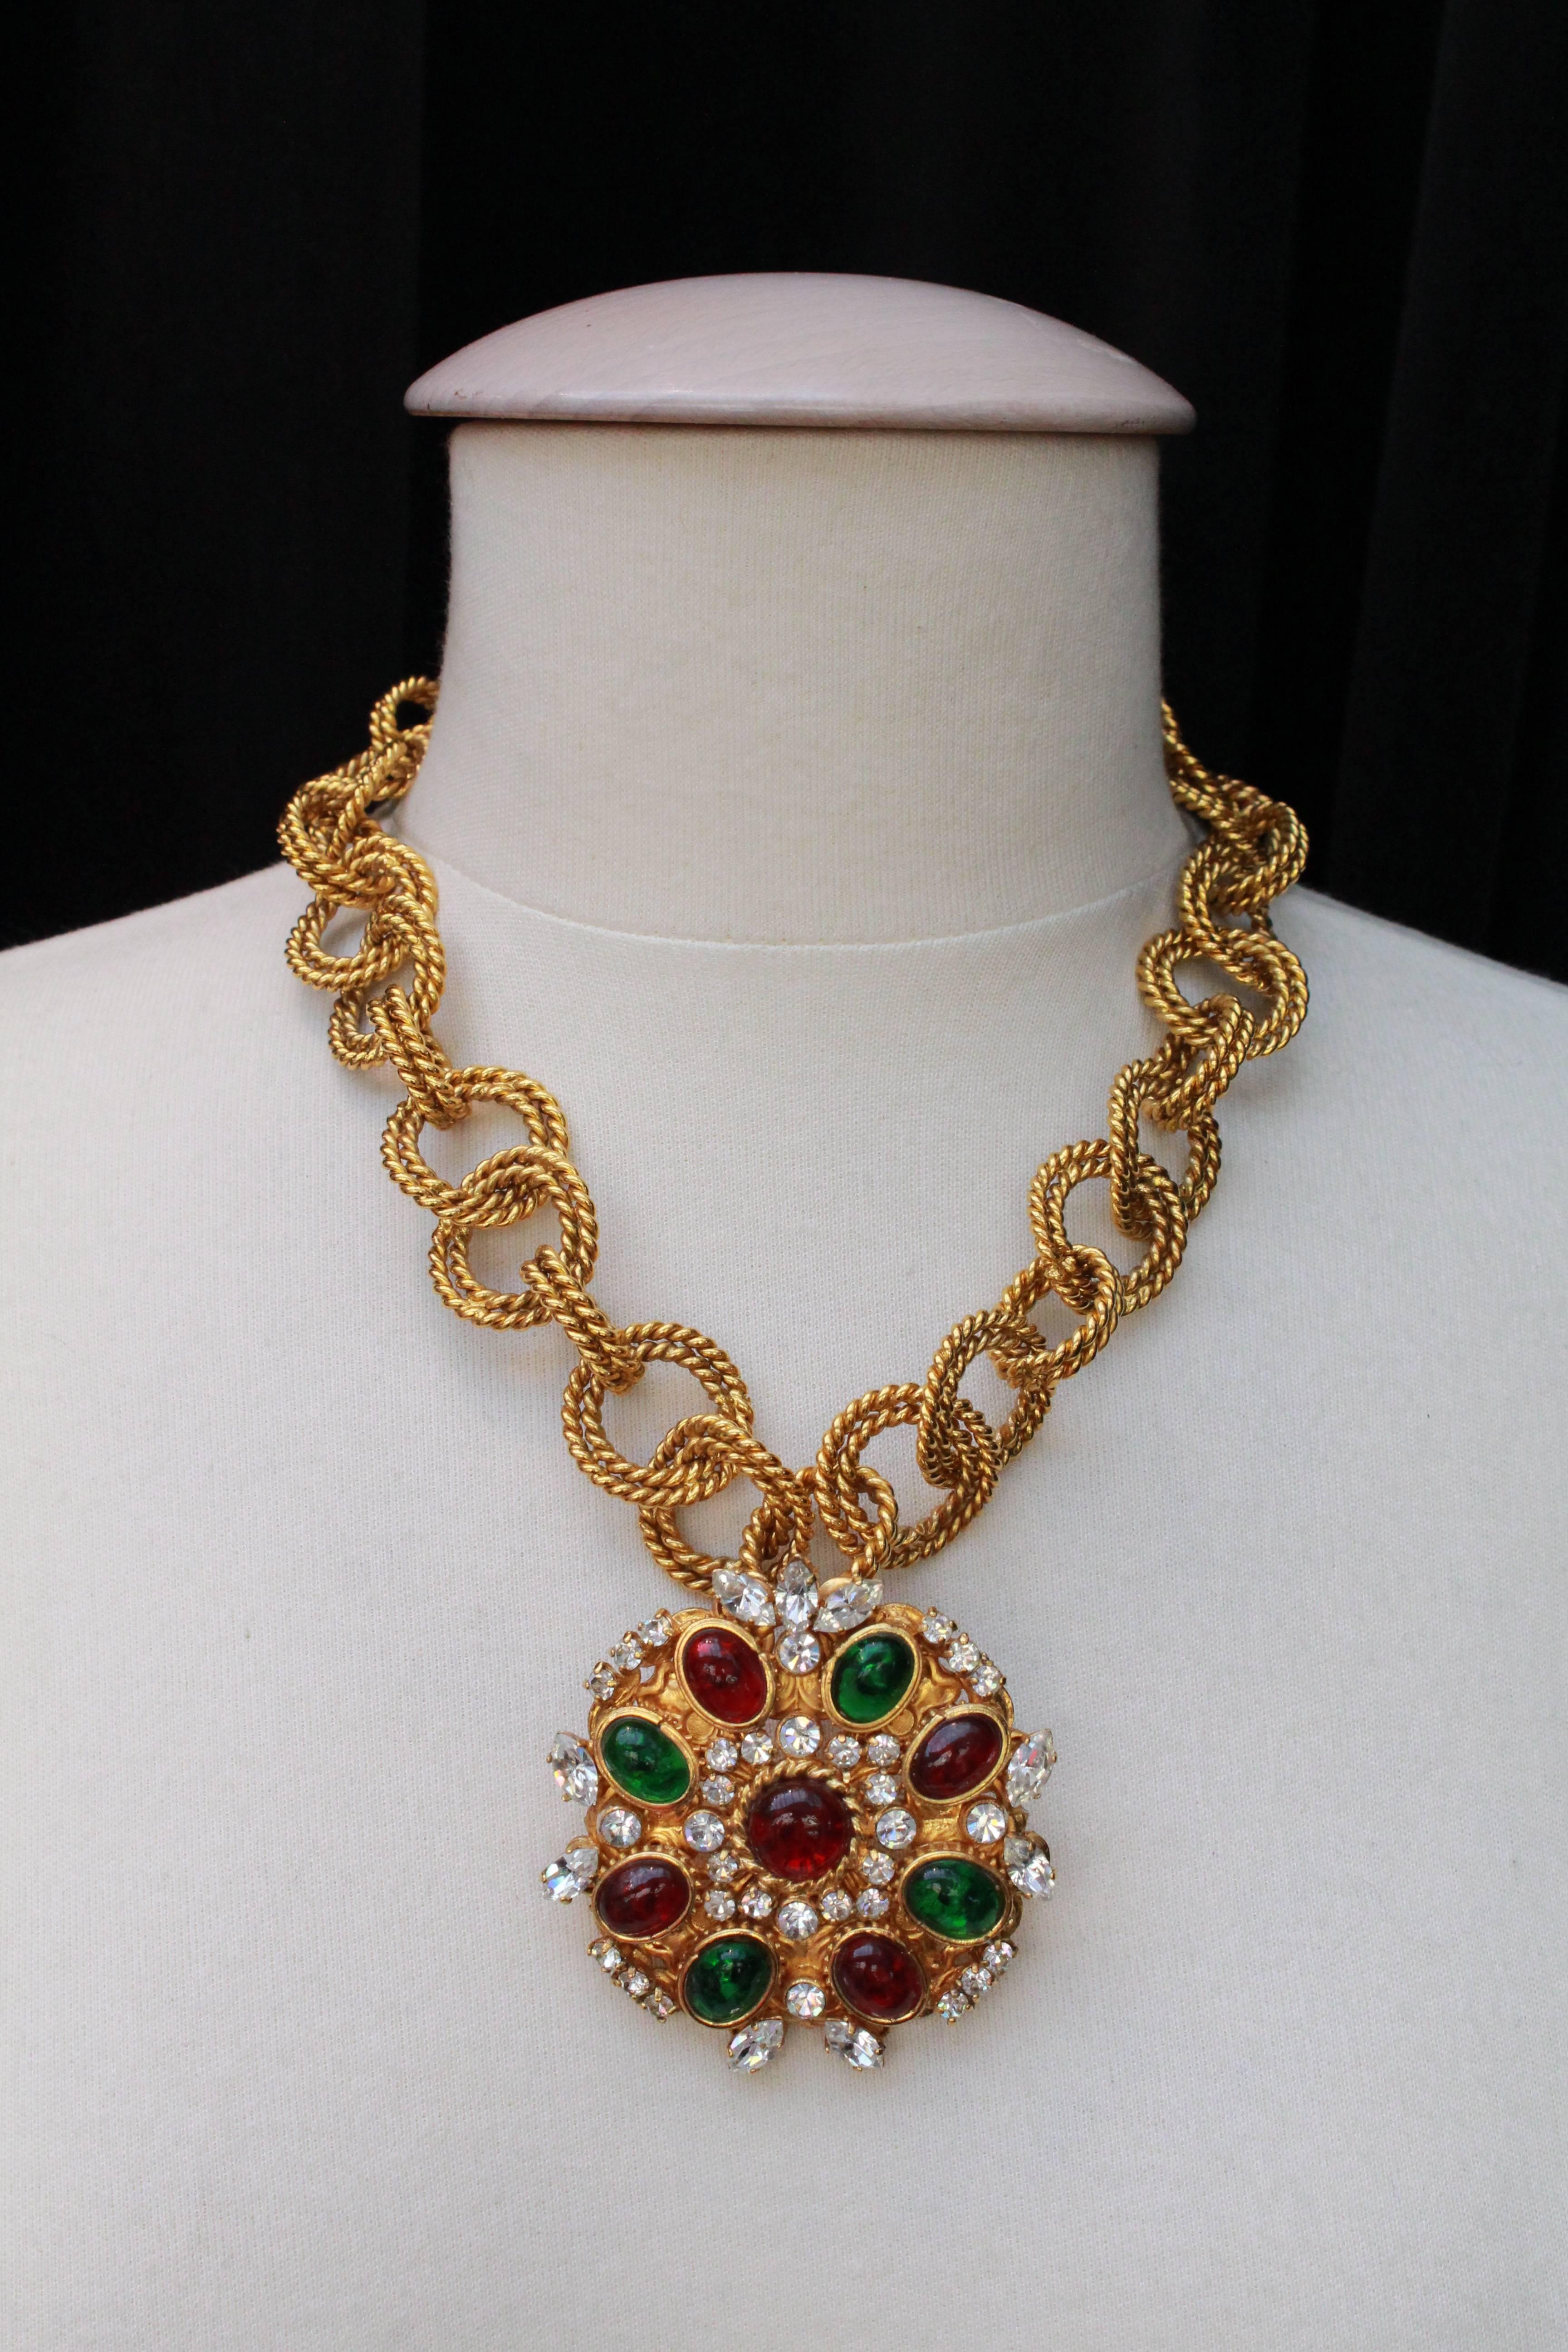 CHANEL (Made in France) Short necklace composed of  extra-large gilded metal  chain with cord motif chiseling. A large gilded metal medallion / pendant decorates the center. It is paved with ruby and emerald glass paste cabochons and rhinestones, in